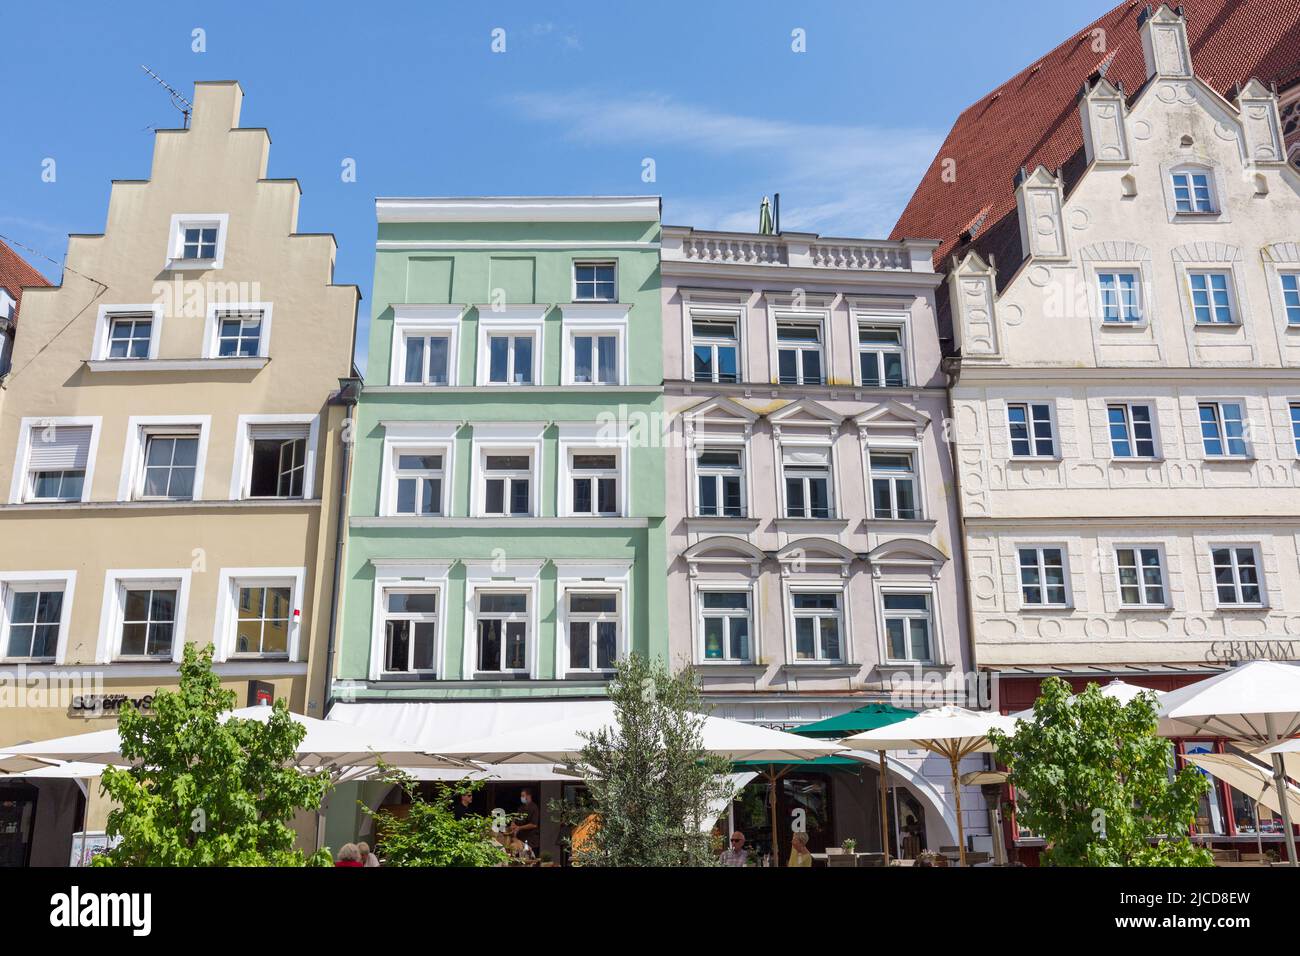 Landshut, Germany - Aug 15, 2021: Historical houses in the old town of Landshut. Stock Photo